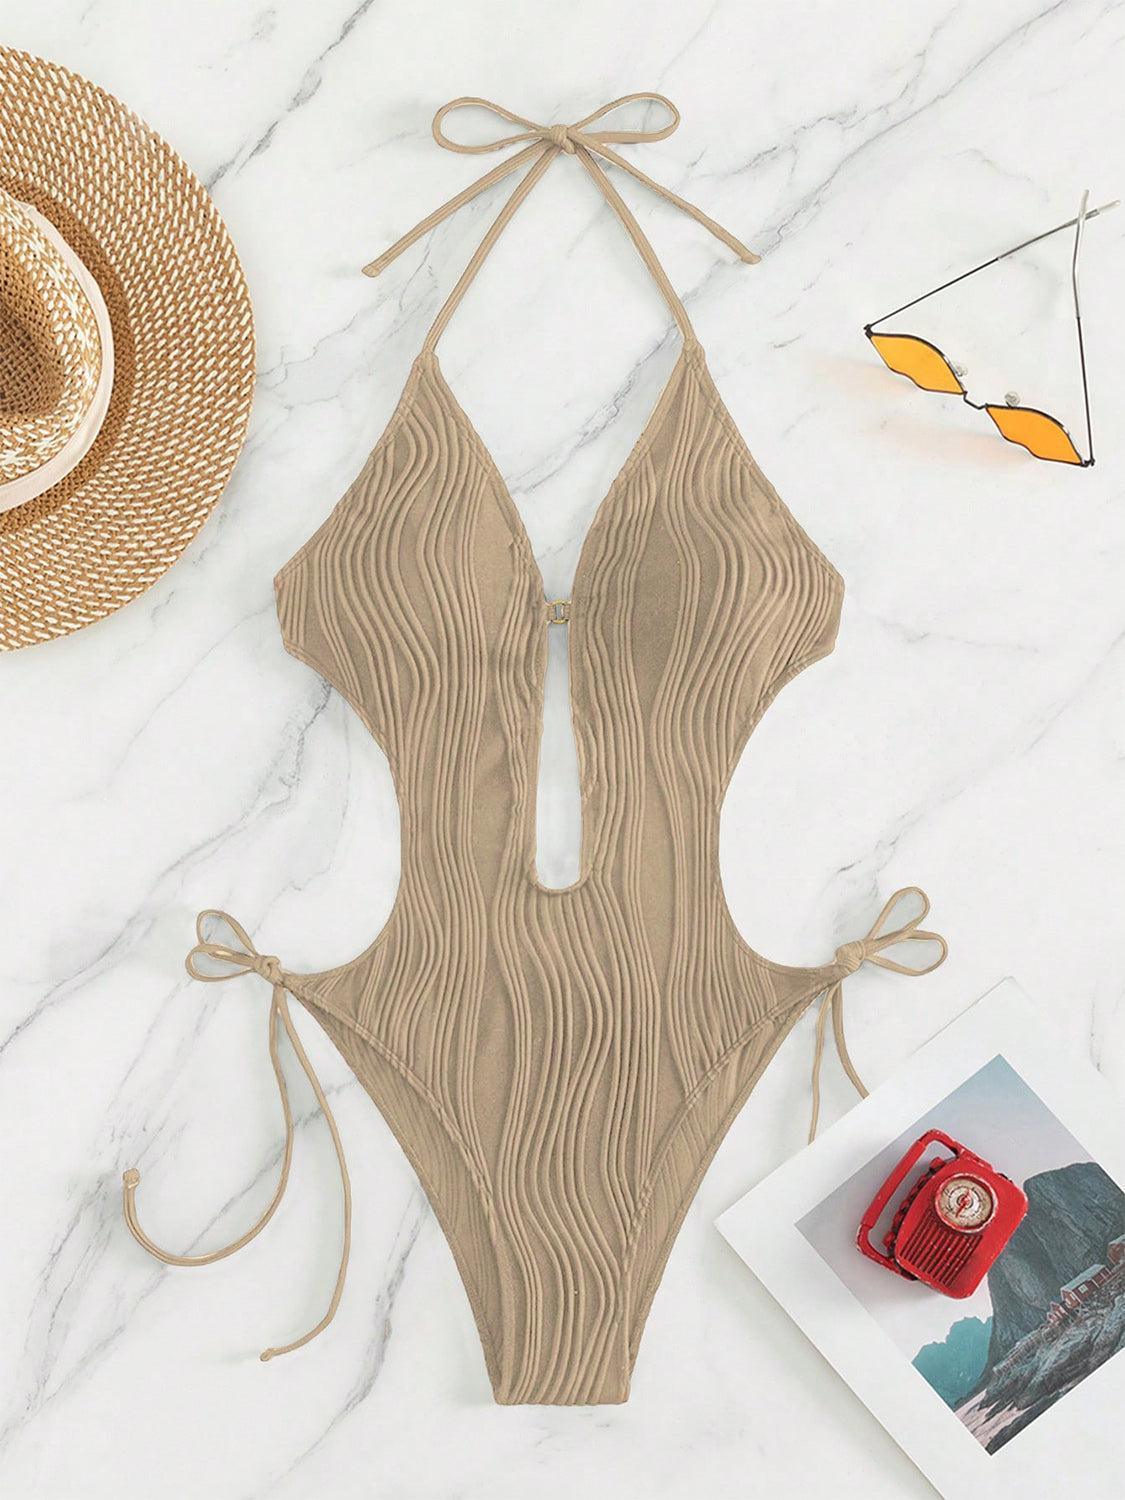 a bathing suit and hat on a marble surface